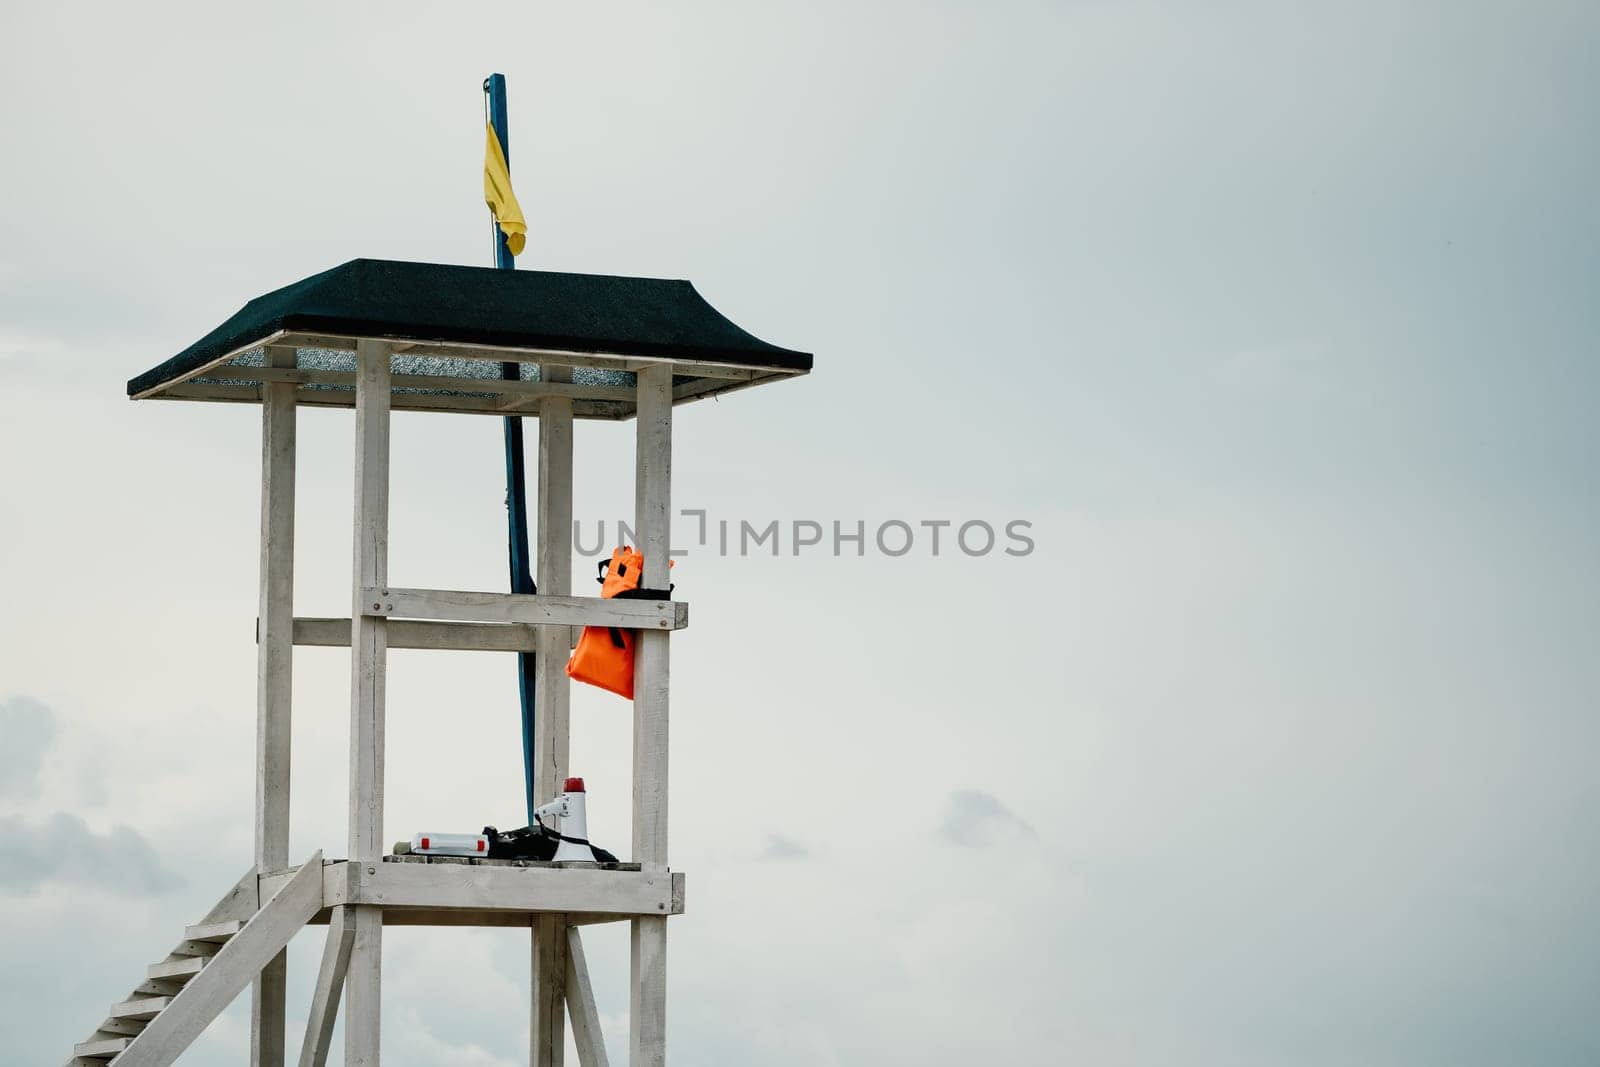 Empty white lifeguard tower with a yellow flag on the beach in windy weather. Beach lifeguard tower with yellow flag indicator. Nobody. Holiday recreation concept